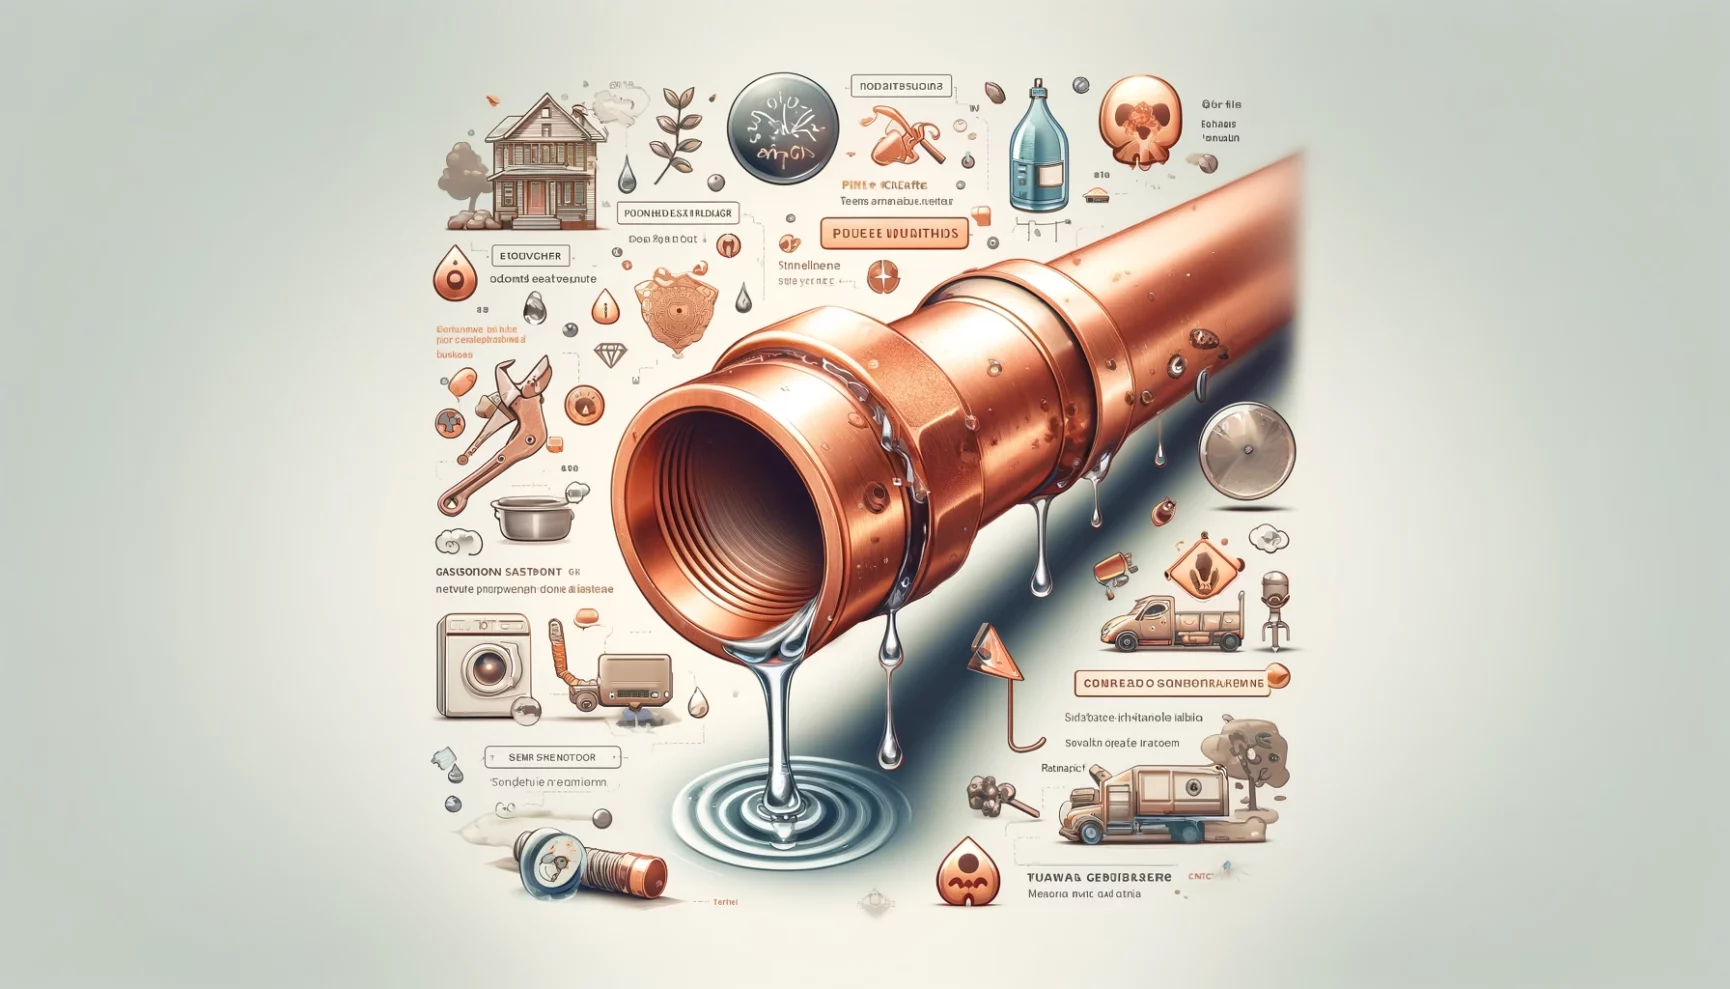 Illustrative infographic depicting a stylized telescope and various astronomy-related icons and concepts.